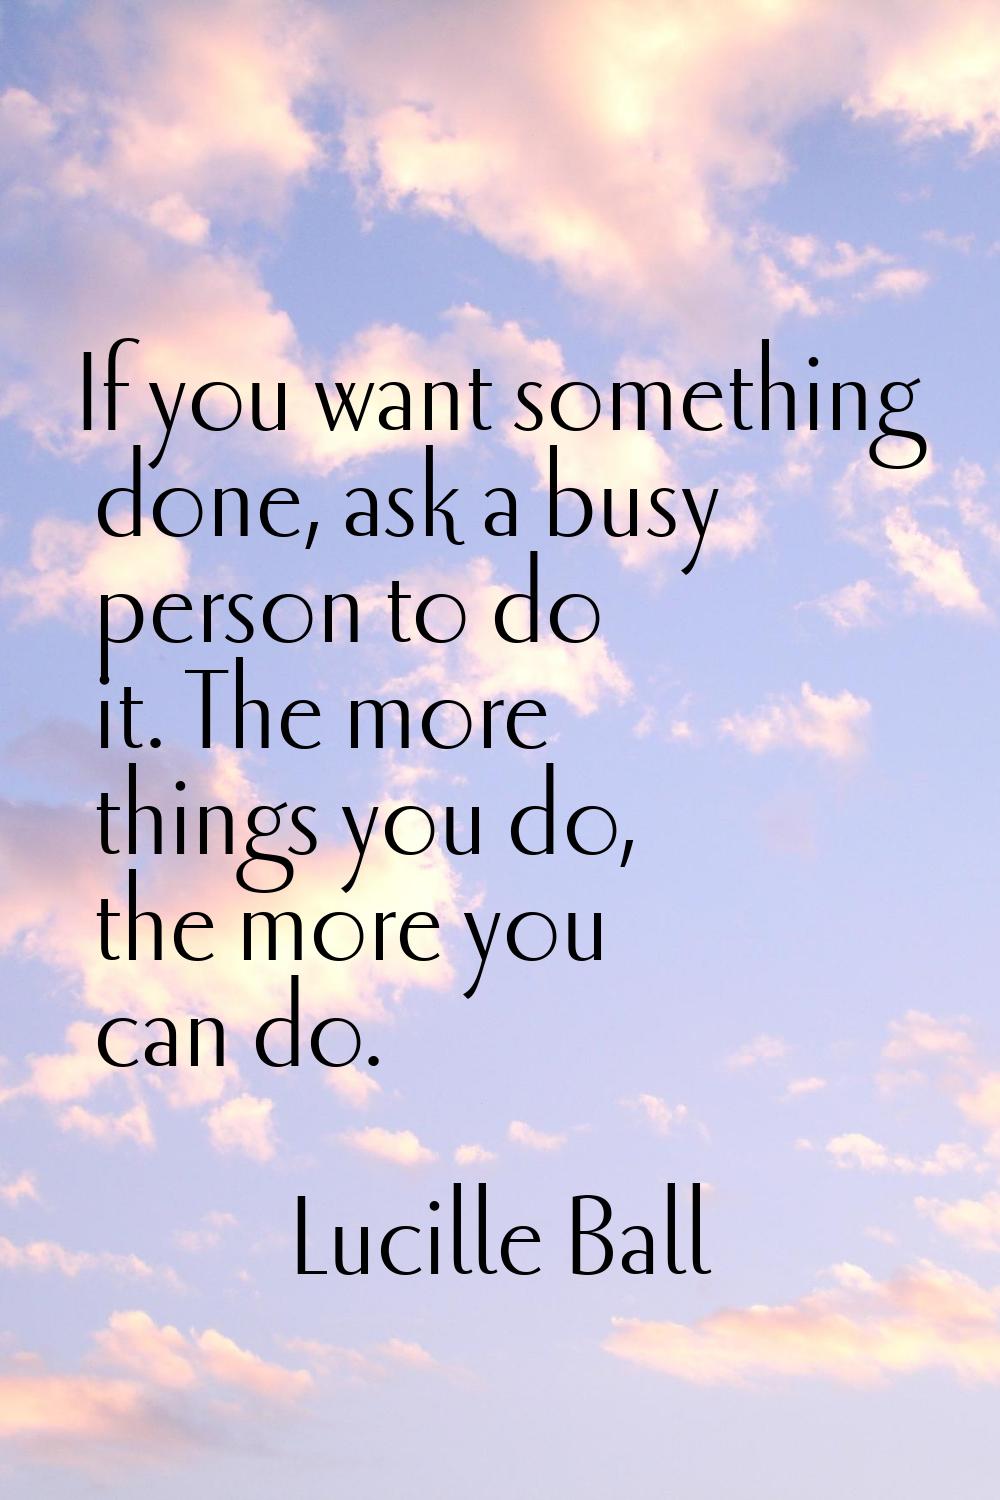 If you want something done, ask a busy person to do it. The more things you do, the more you can do